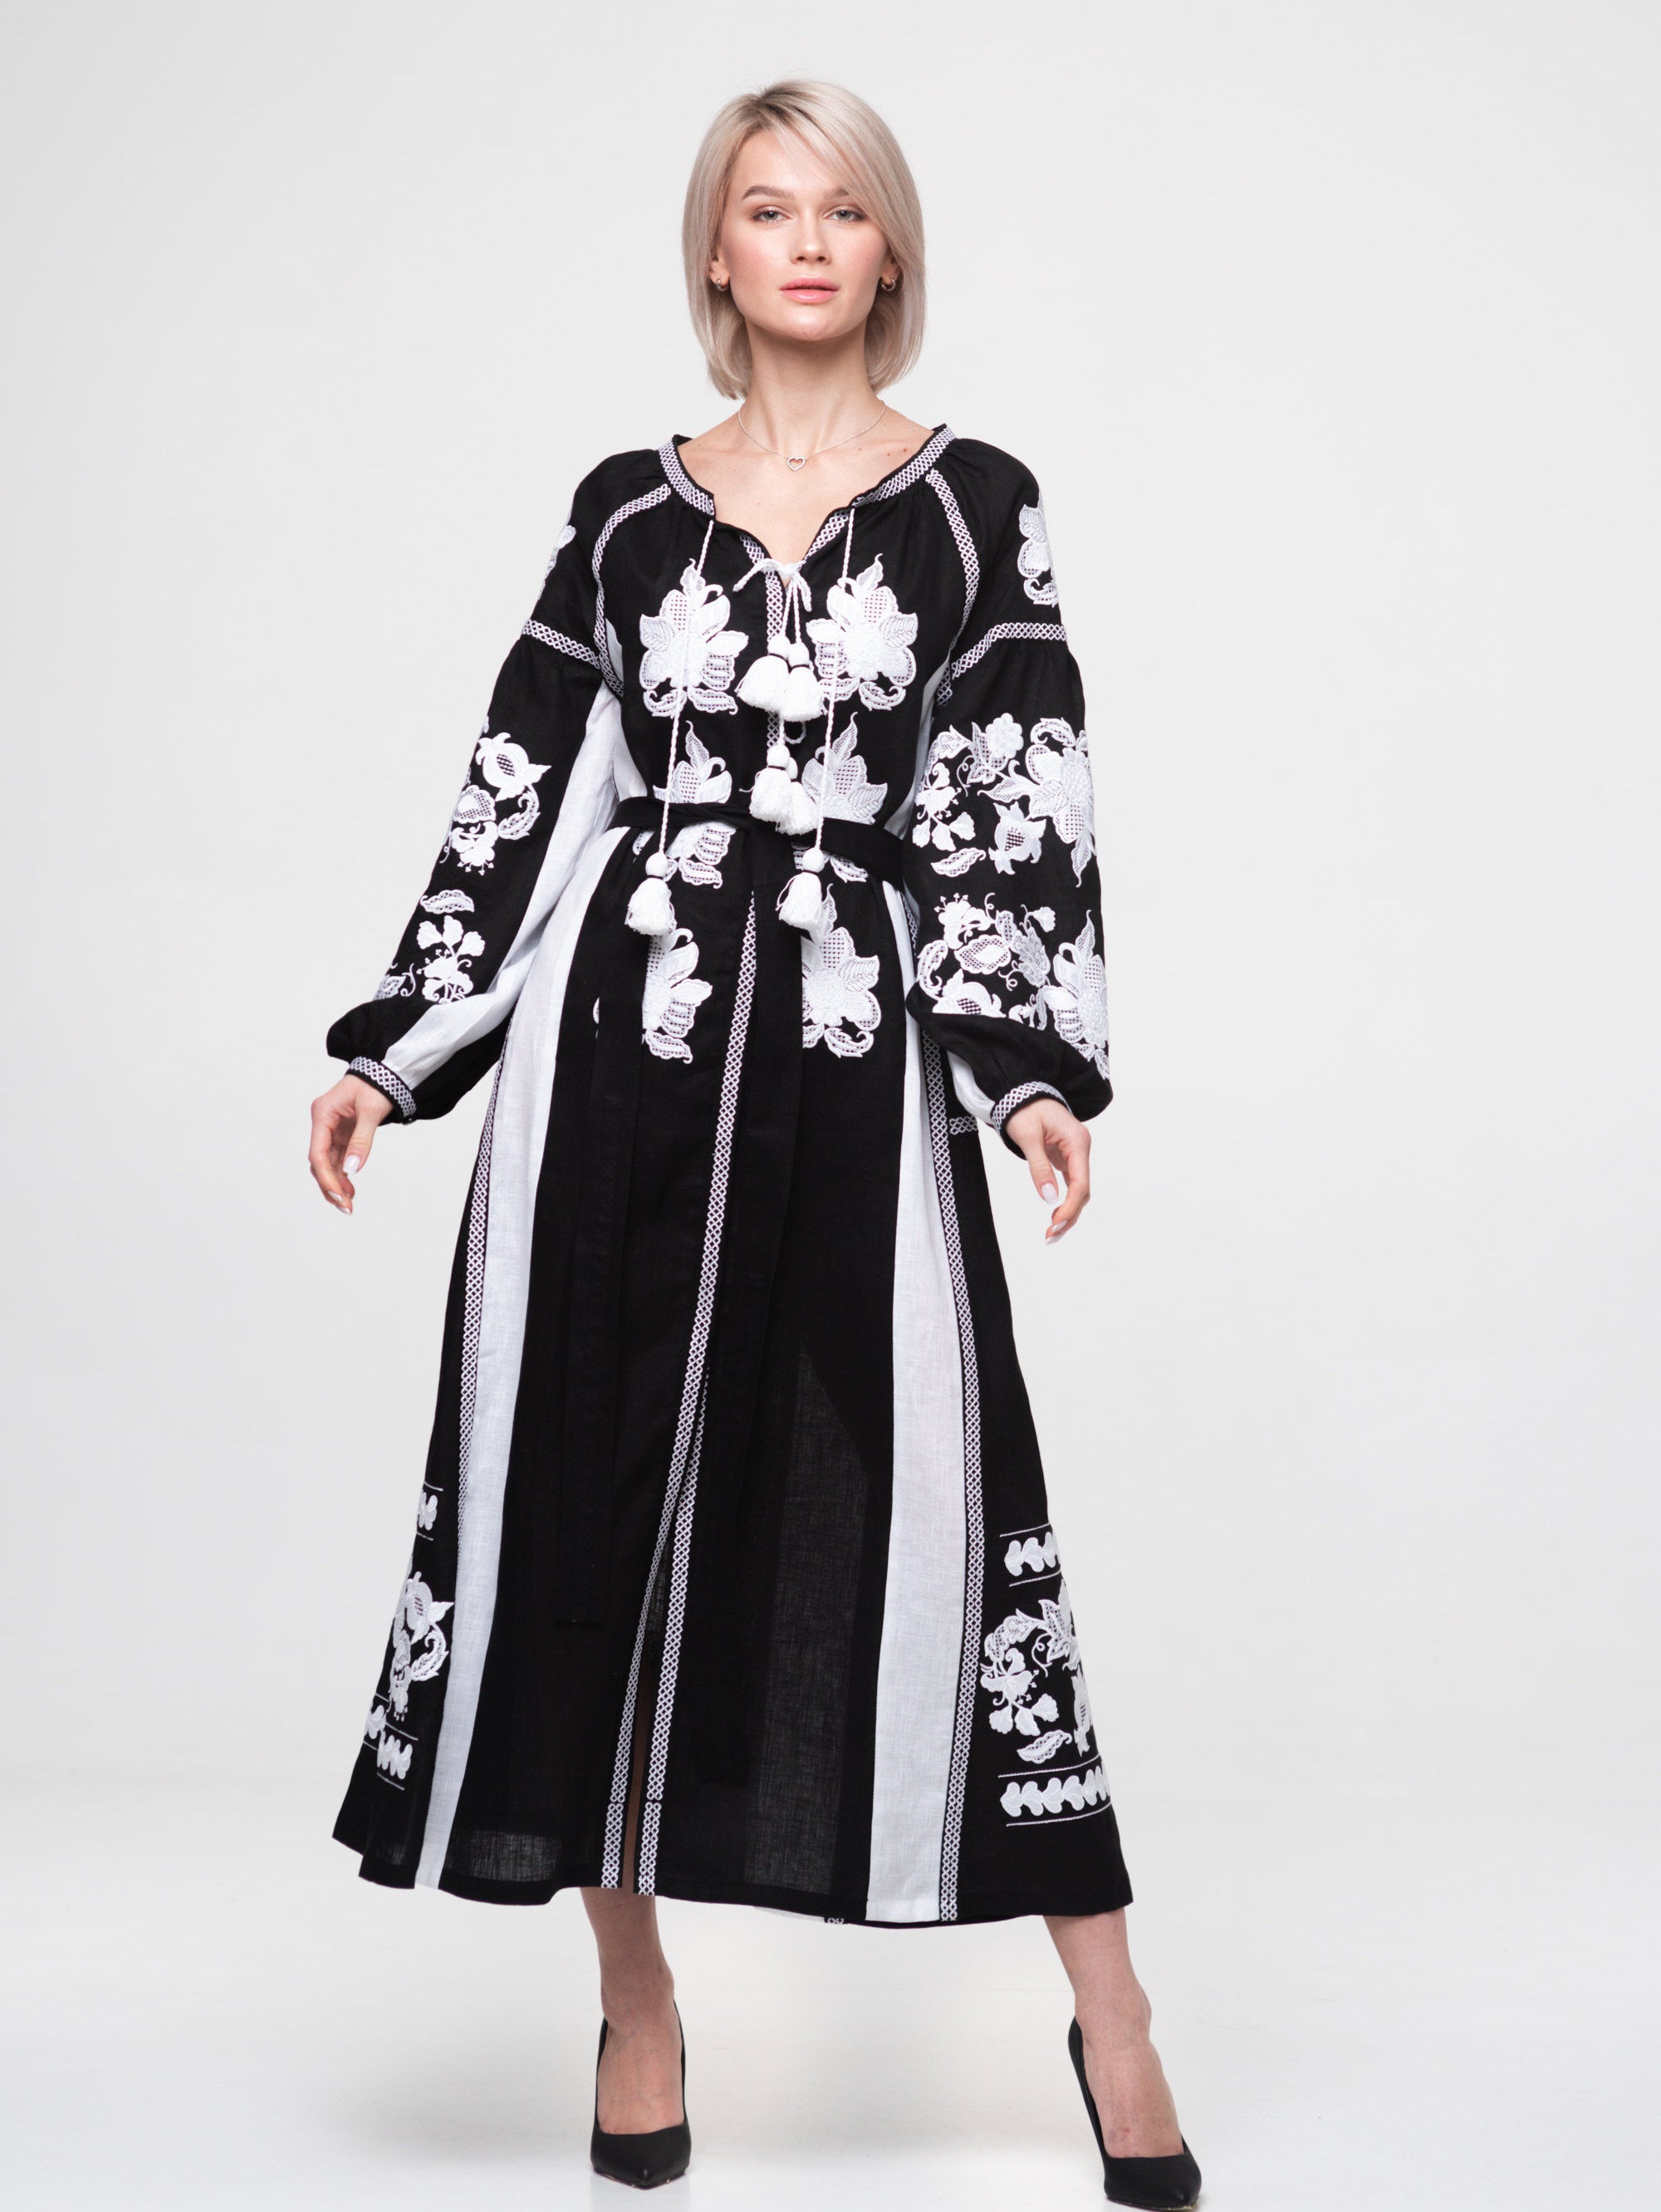 Divine floral embroidered dress kaftan Boho wedding guest outfit in monochrome